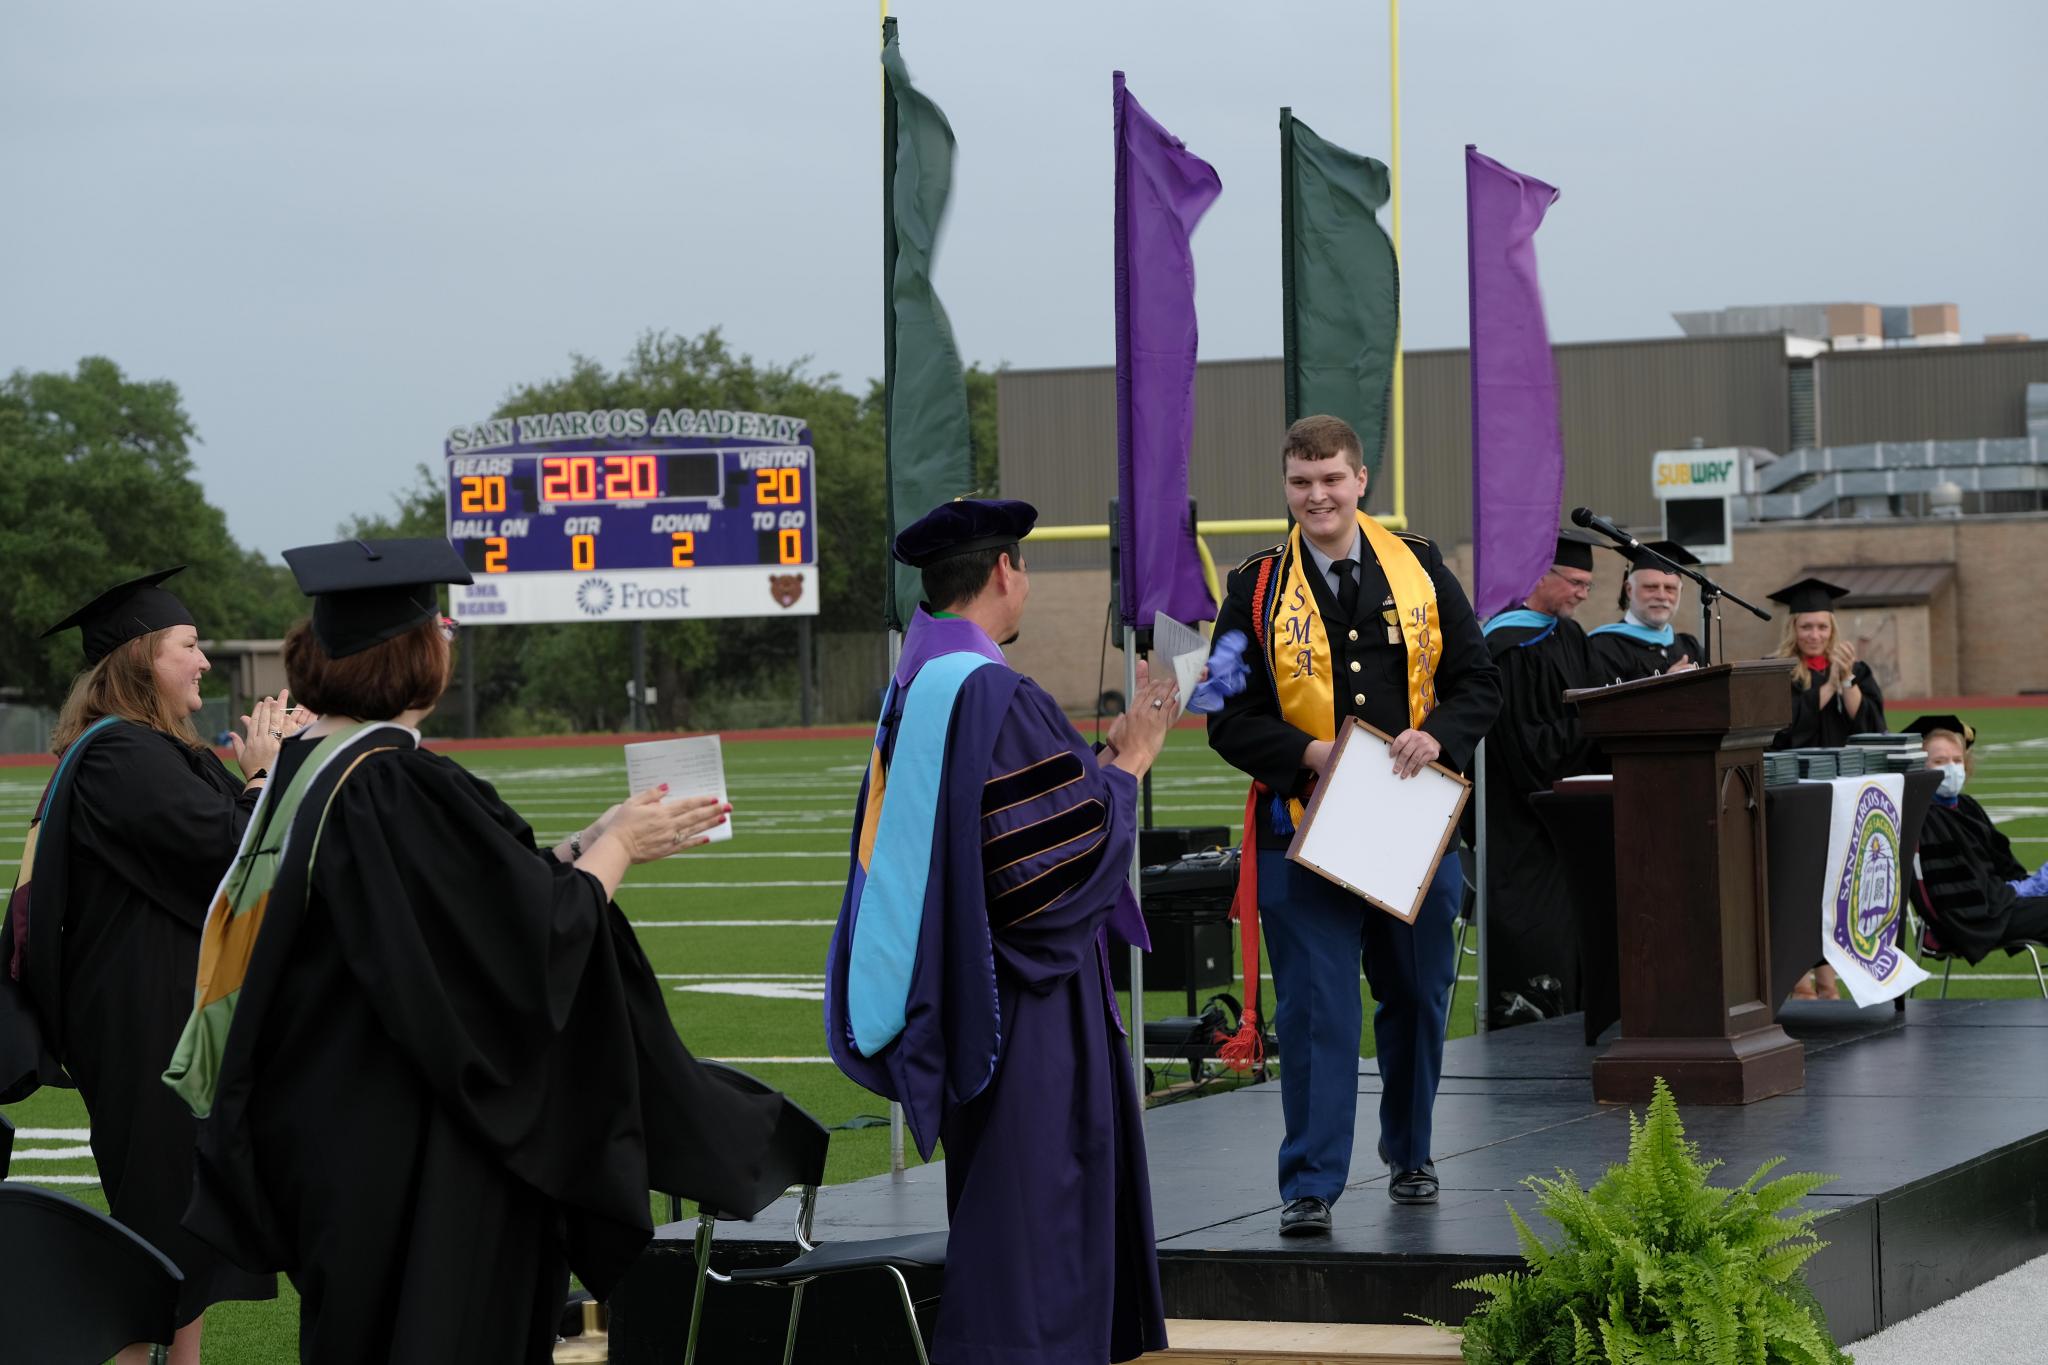 After delivering the Valedictorian Address, Carter Pruitt of New Braunfels, Texas, exits the stage to a standing ovation. Pruitt will enter the University of Texas at Austin this fall to pursue a degree in architectural engineering.